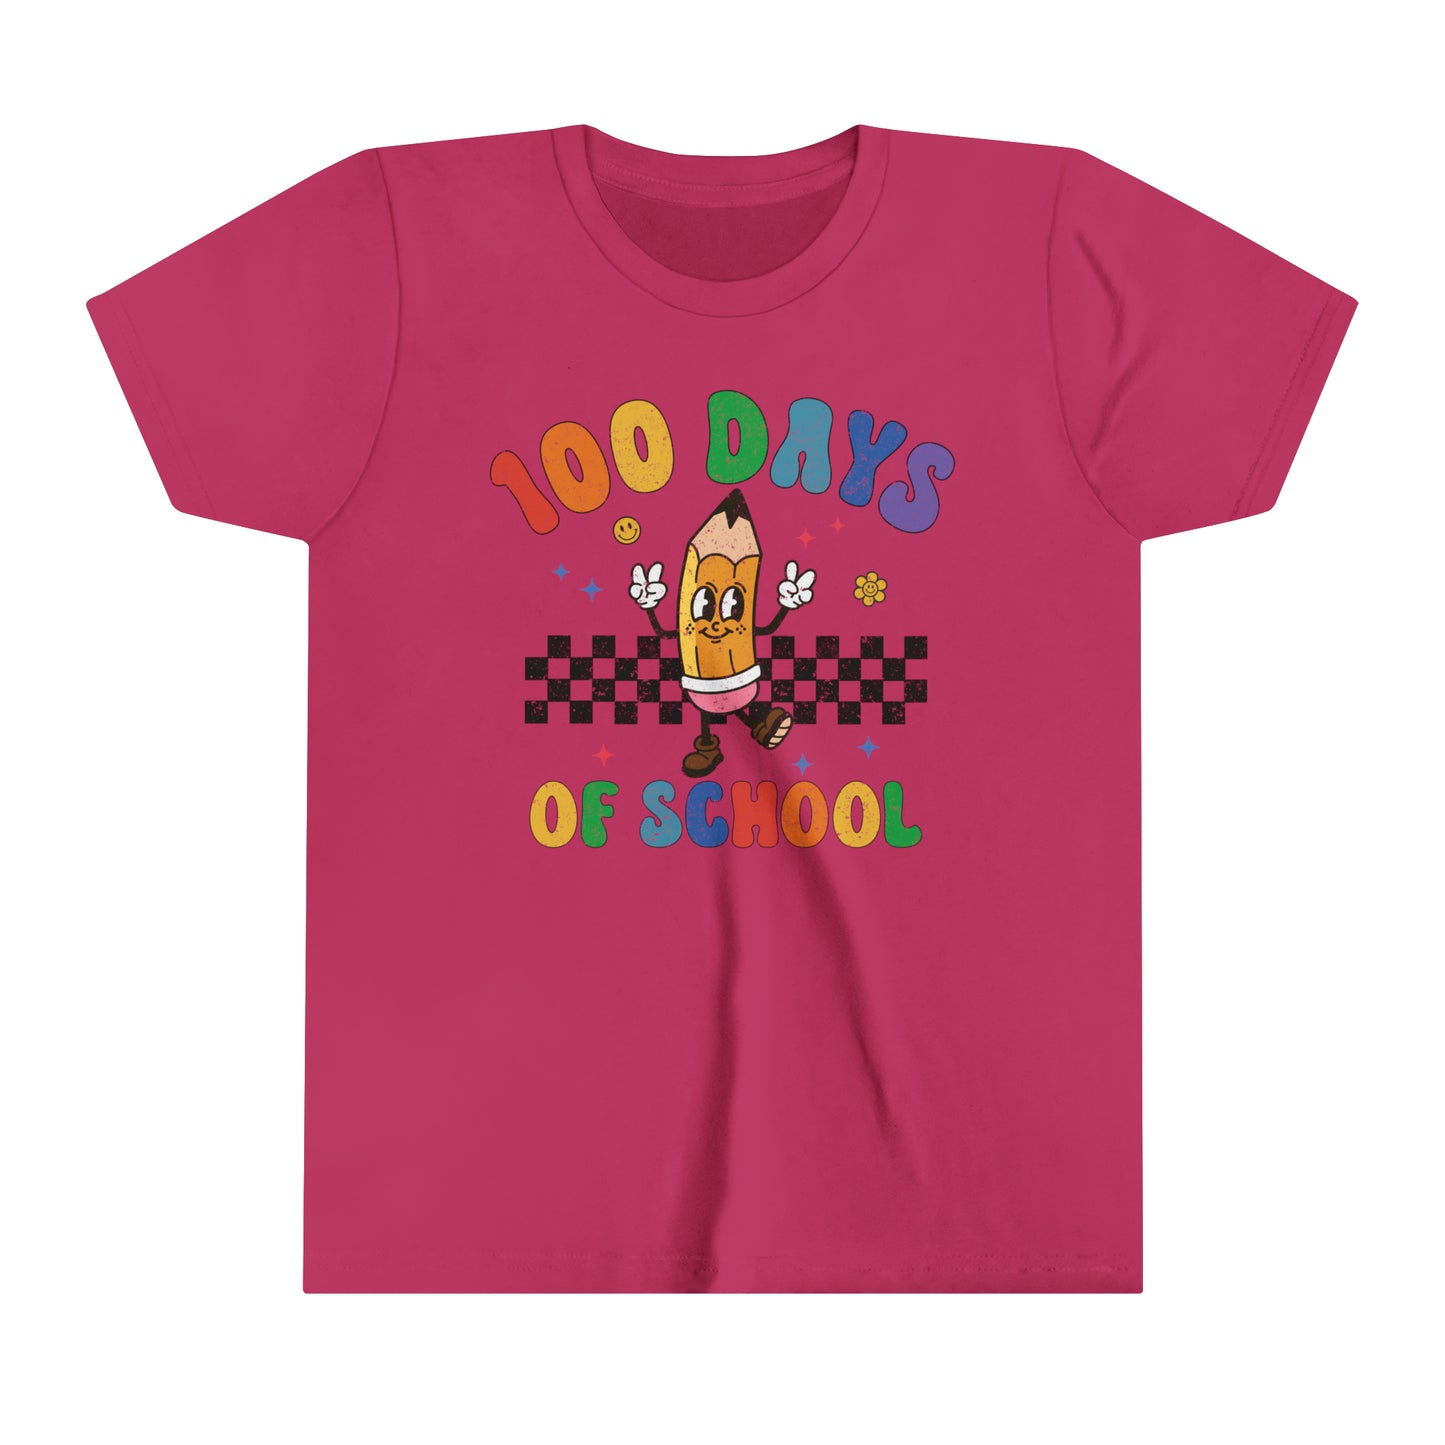 100 Days of School Youth Boy's and Girl's Unisex Short Sleeve Tee